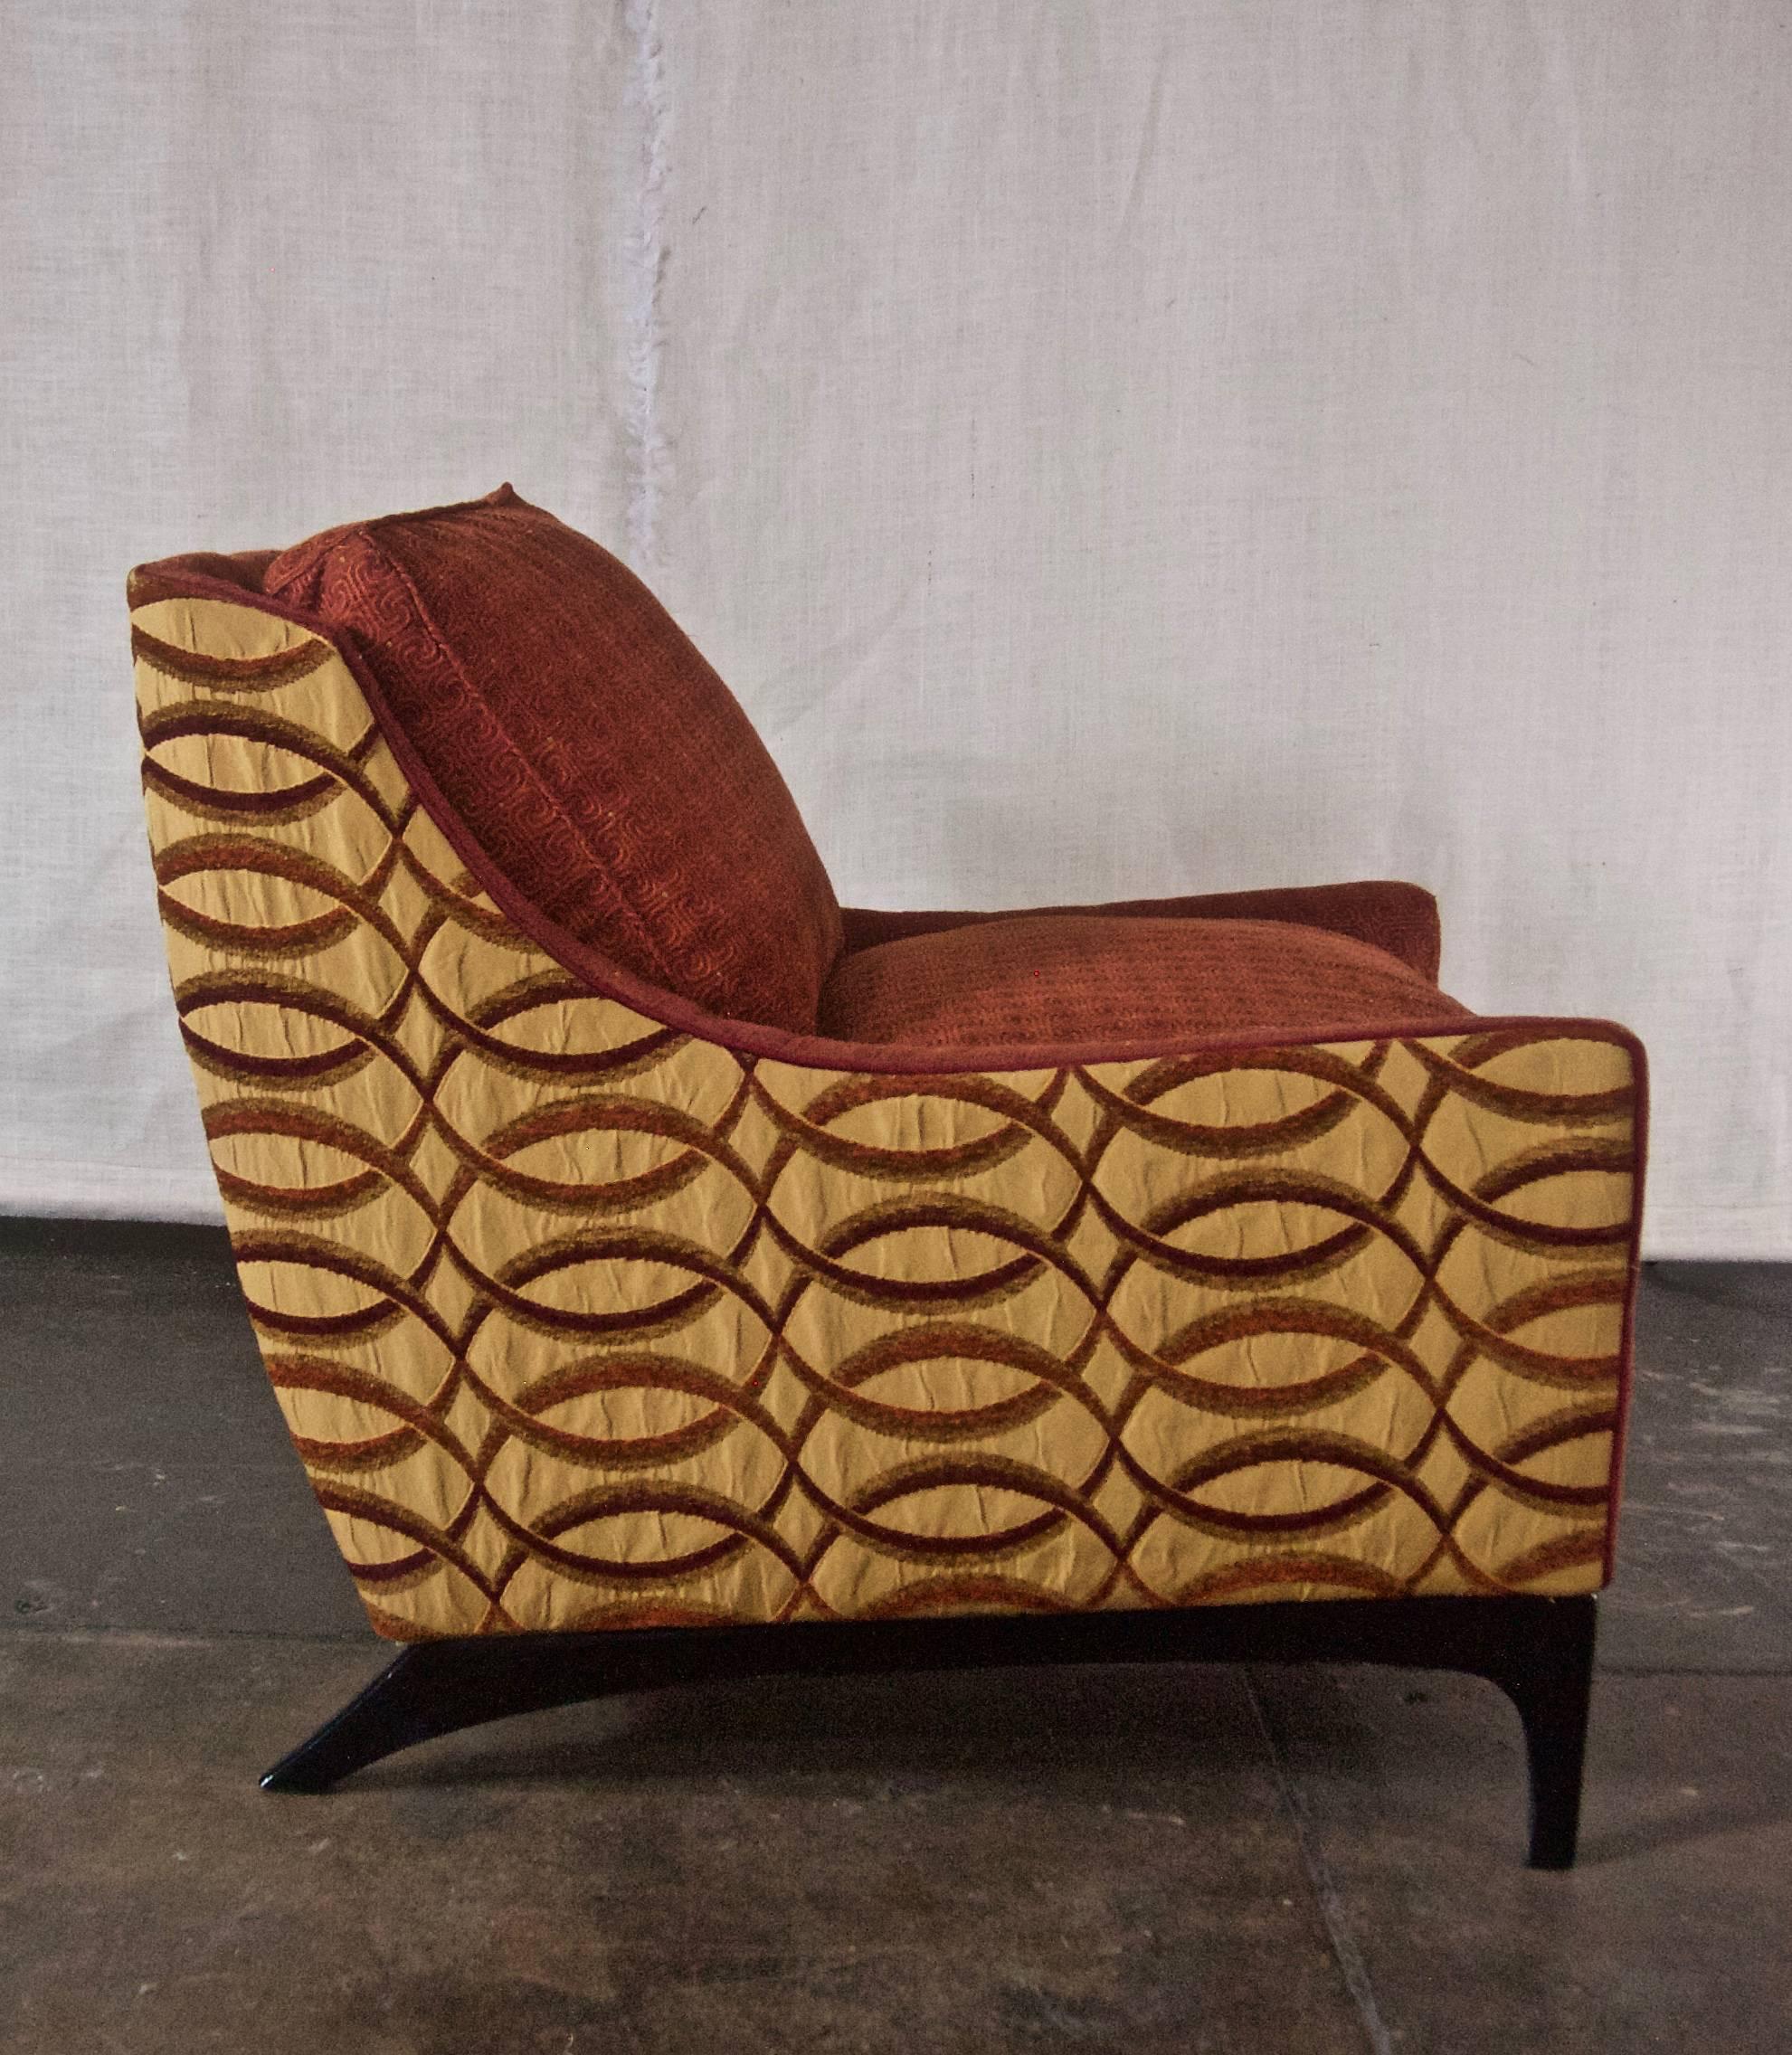 Hand-Crafted Midcentury Upholstered Lounge Chair